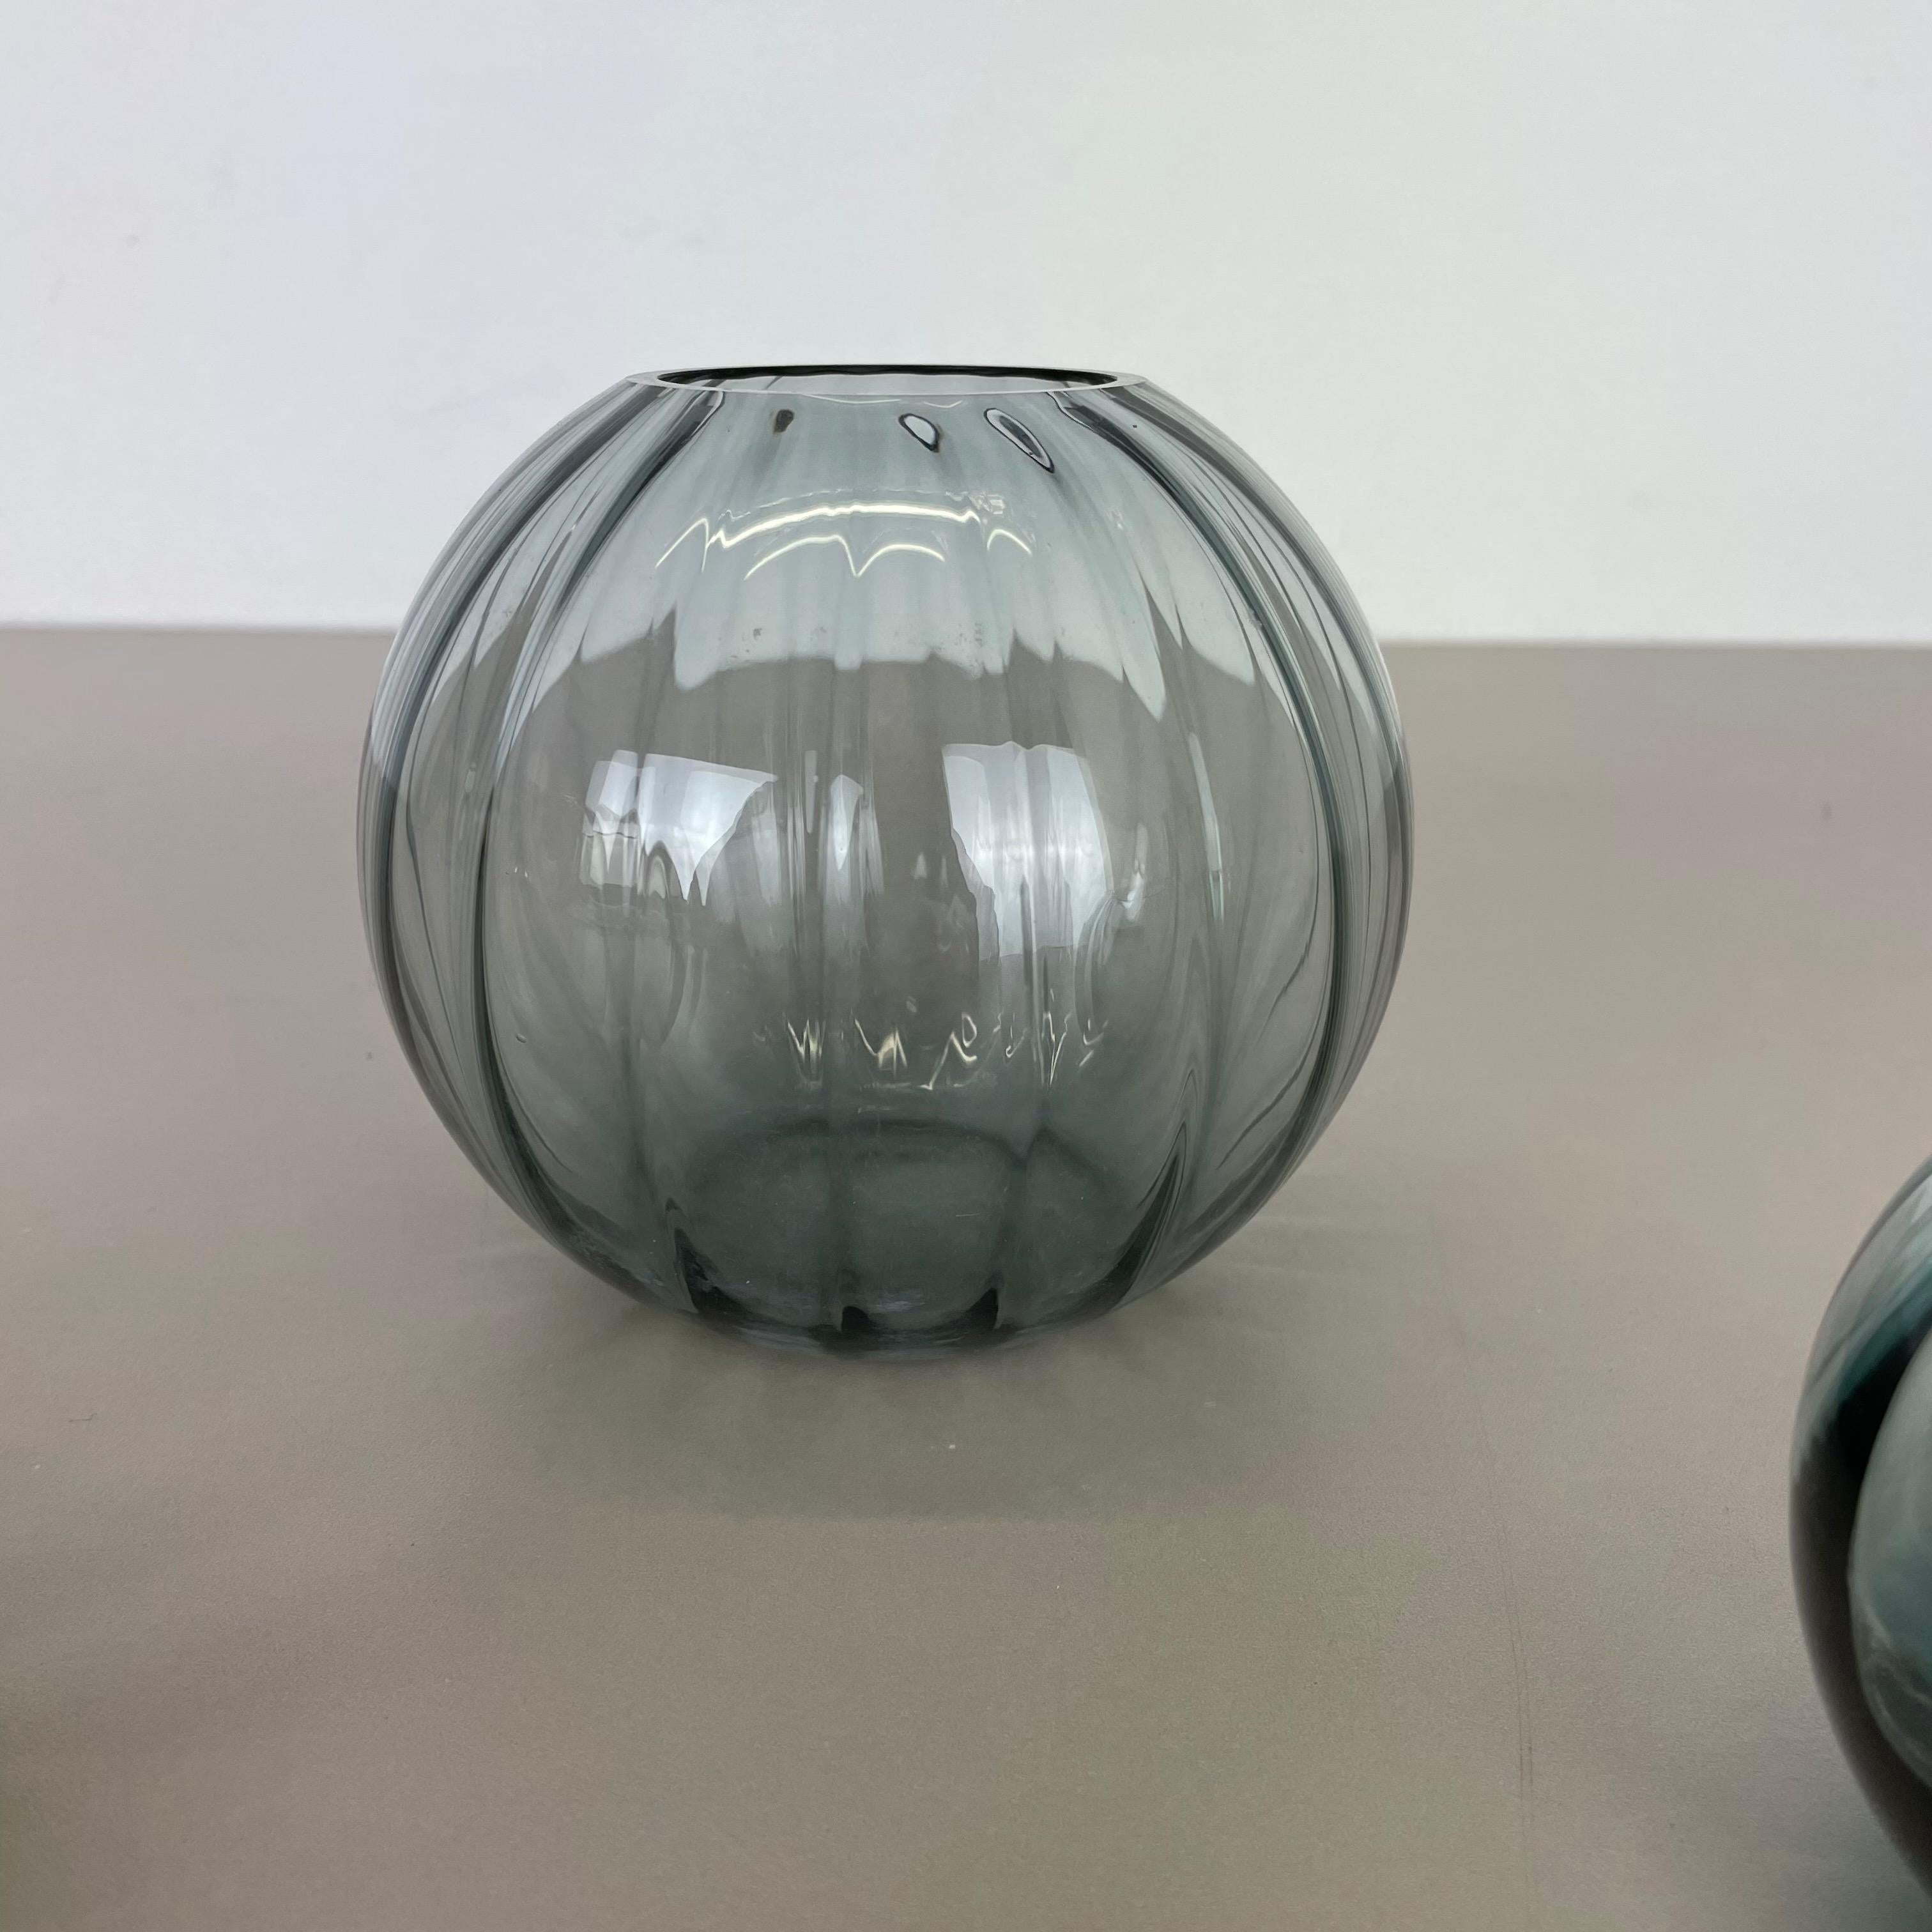 Vintage 1960s Set of 3 Ball Vases Turmaline by Wilhelm Wagenfeld for WMF Germany For Sale 4